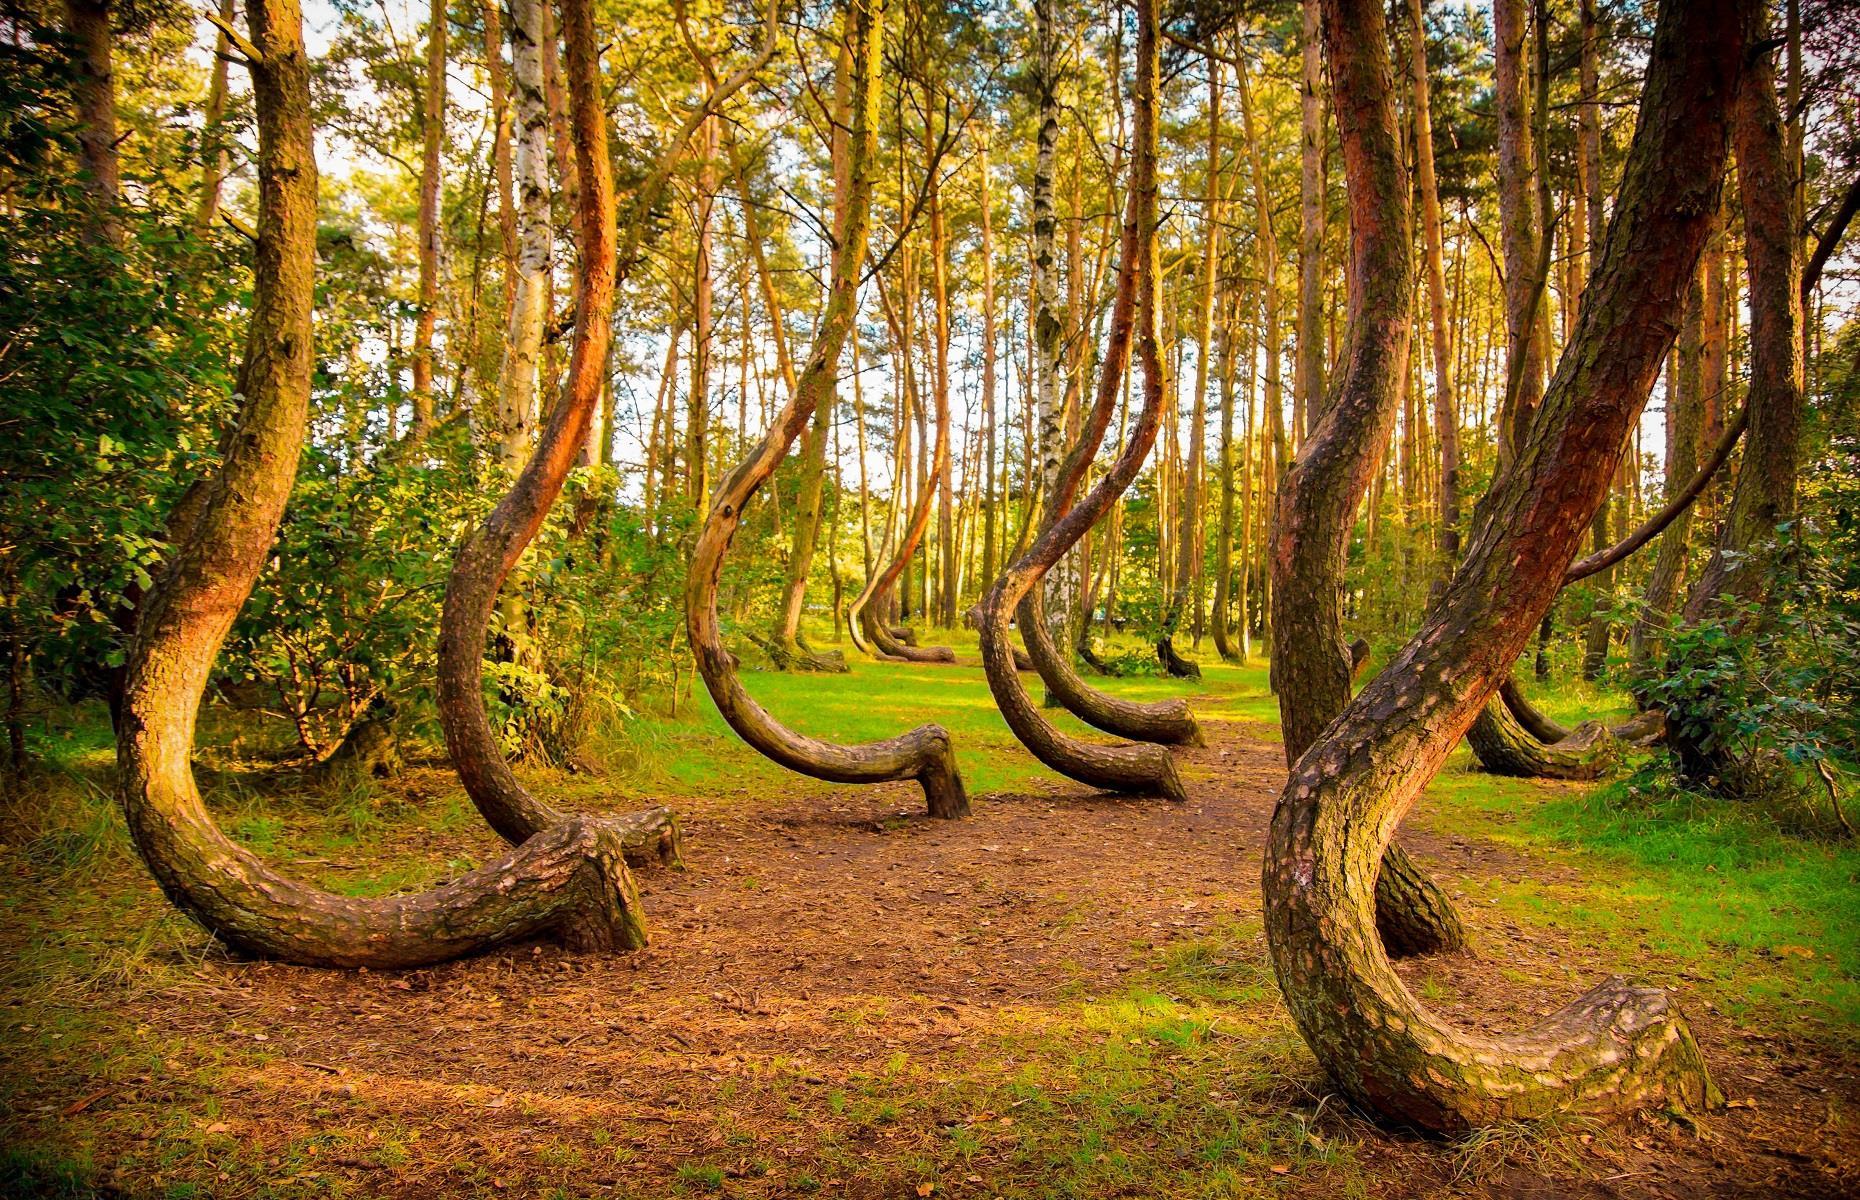 <p>With its J-shaped tree trunks, the aptly named Crooked Forest is as baffling as it is beautiful. Located near the Polish city of Gryfino, it’s home to more than 400 pine trees believed to have been planted in the 1930s and each displaying a curved trunk. Stranger still, the vast majority of them bend in a northward direction. Arboriculturists (tree scientists) have debated how this otherworldly landscape came to be but so far no one has been able to explain it.</p>